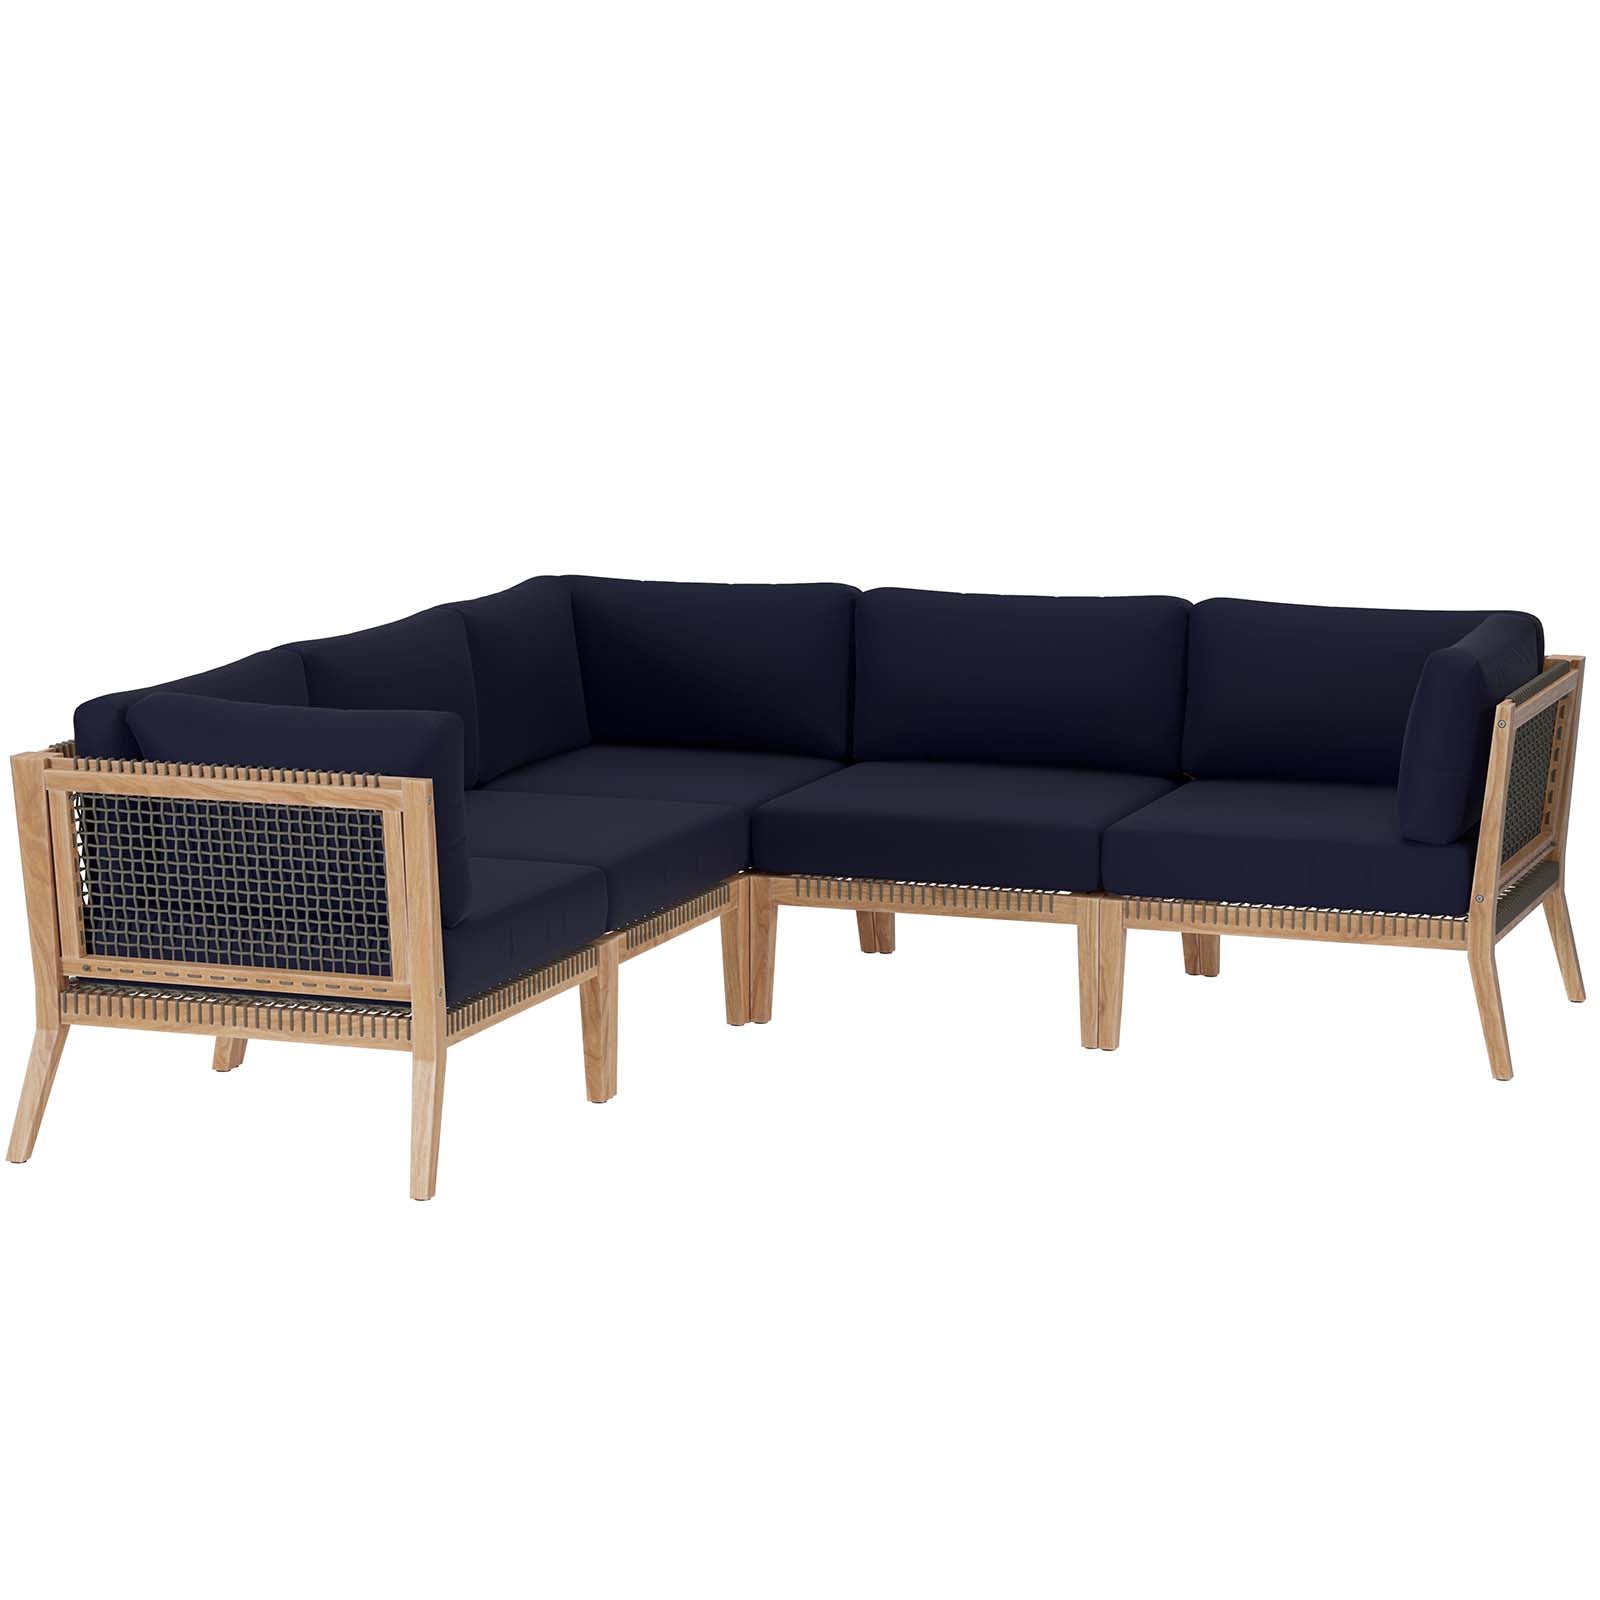 Modway Outdoor Sofas - Clearwater-Outdoor-Patio-Teak-Wood-5-Piece-Sectional-Sofa-Gray-Navy